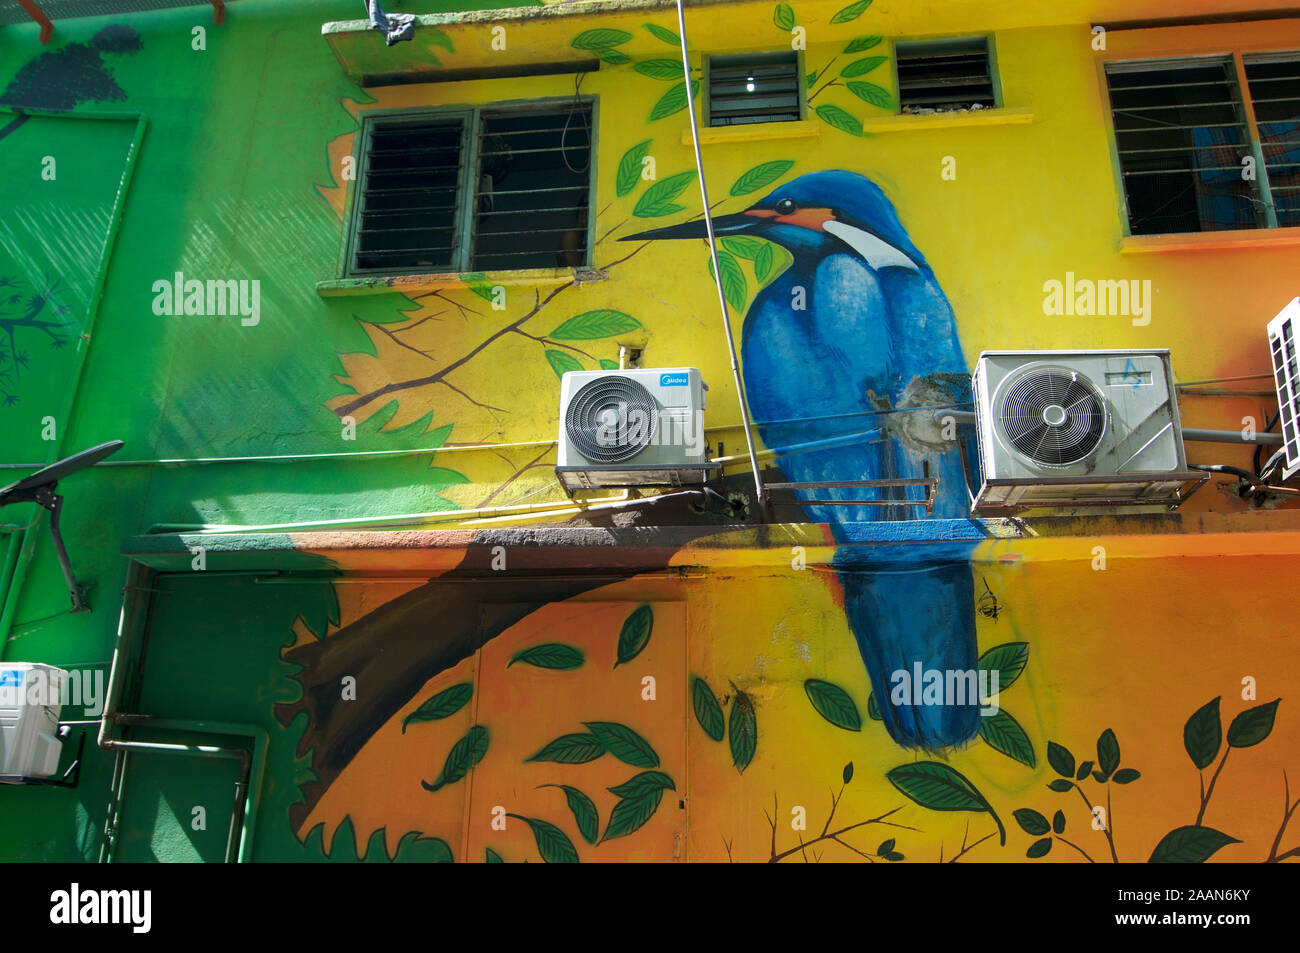 Bukit Bintang, Kuala Lumpur, Malaysia - 10th May 2019 : Close up picture of a Mural representing a blue King Fisher bird located in the colorful mural Stock Photo